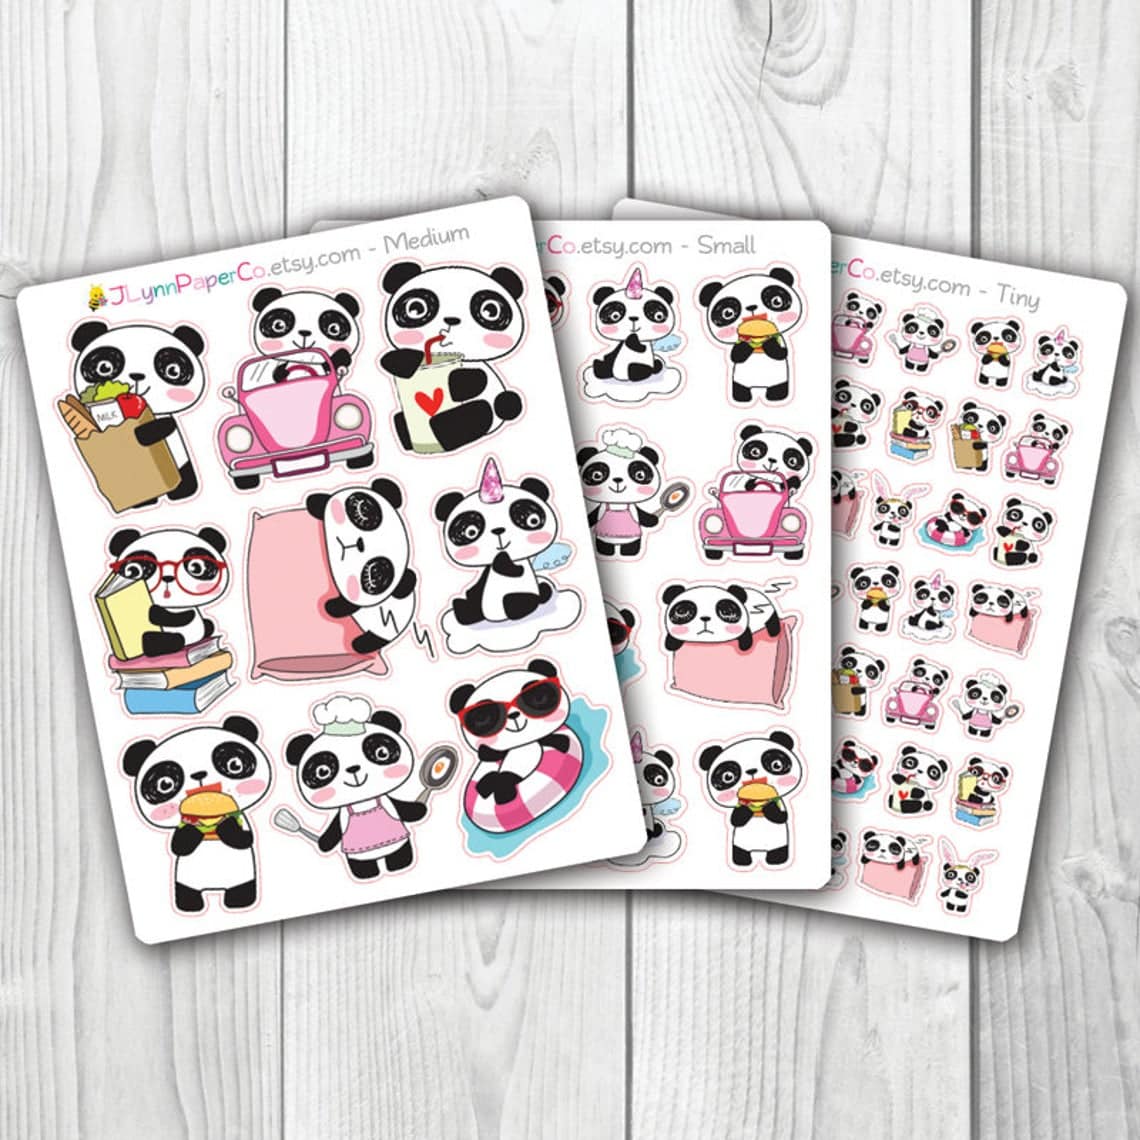 A Cute Panda Sticker for Every Occasion